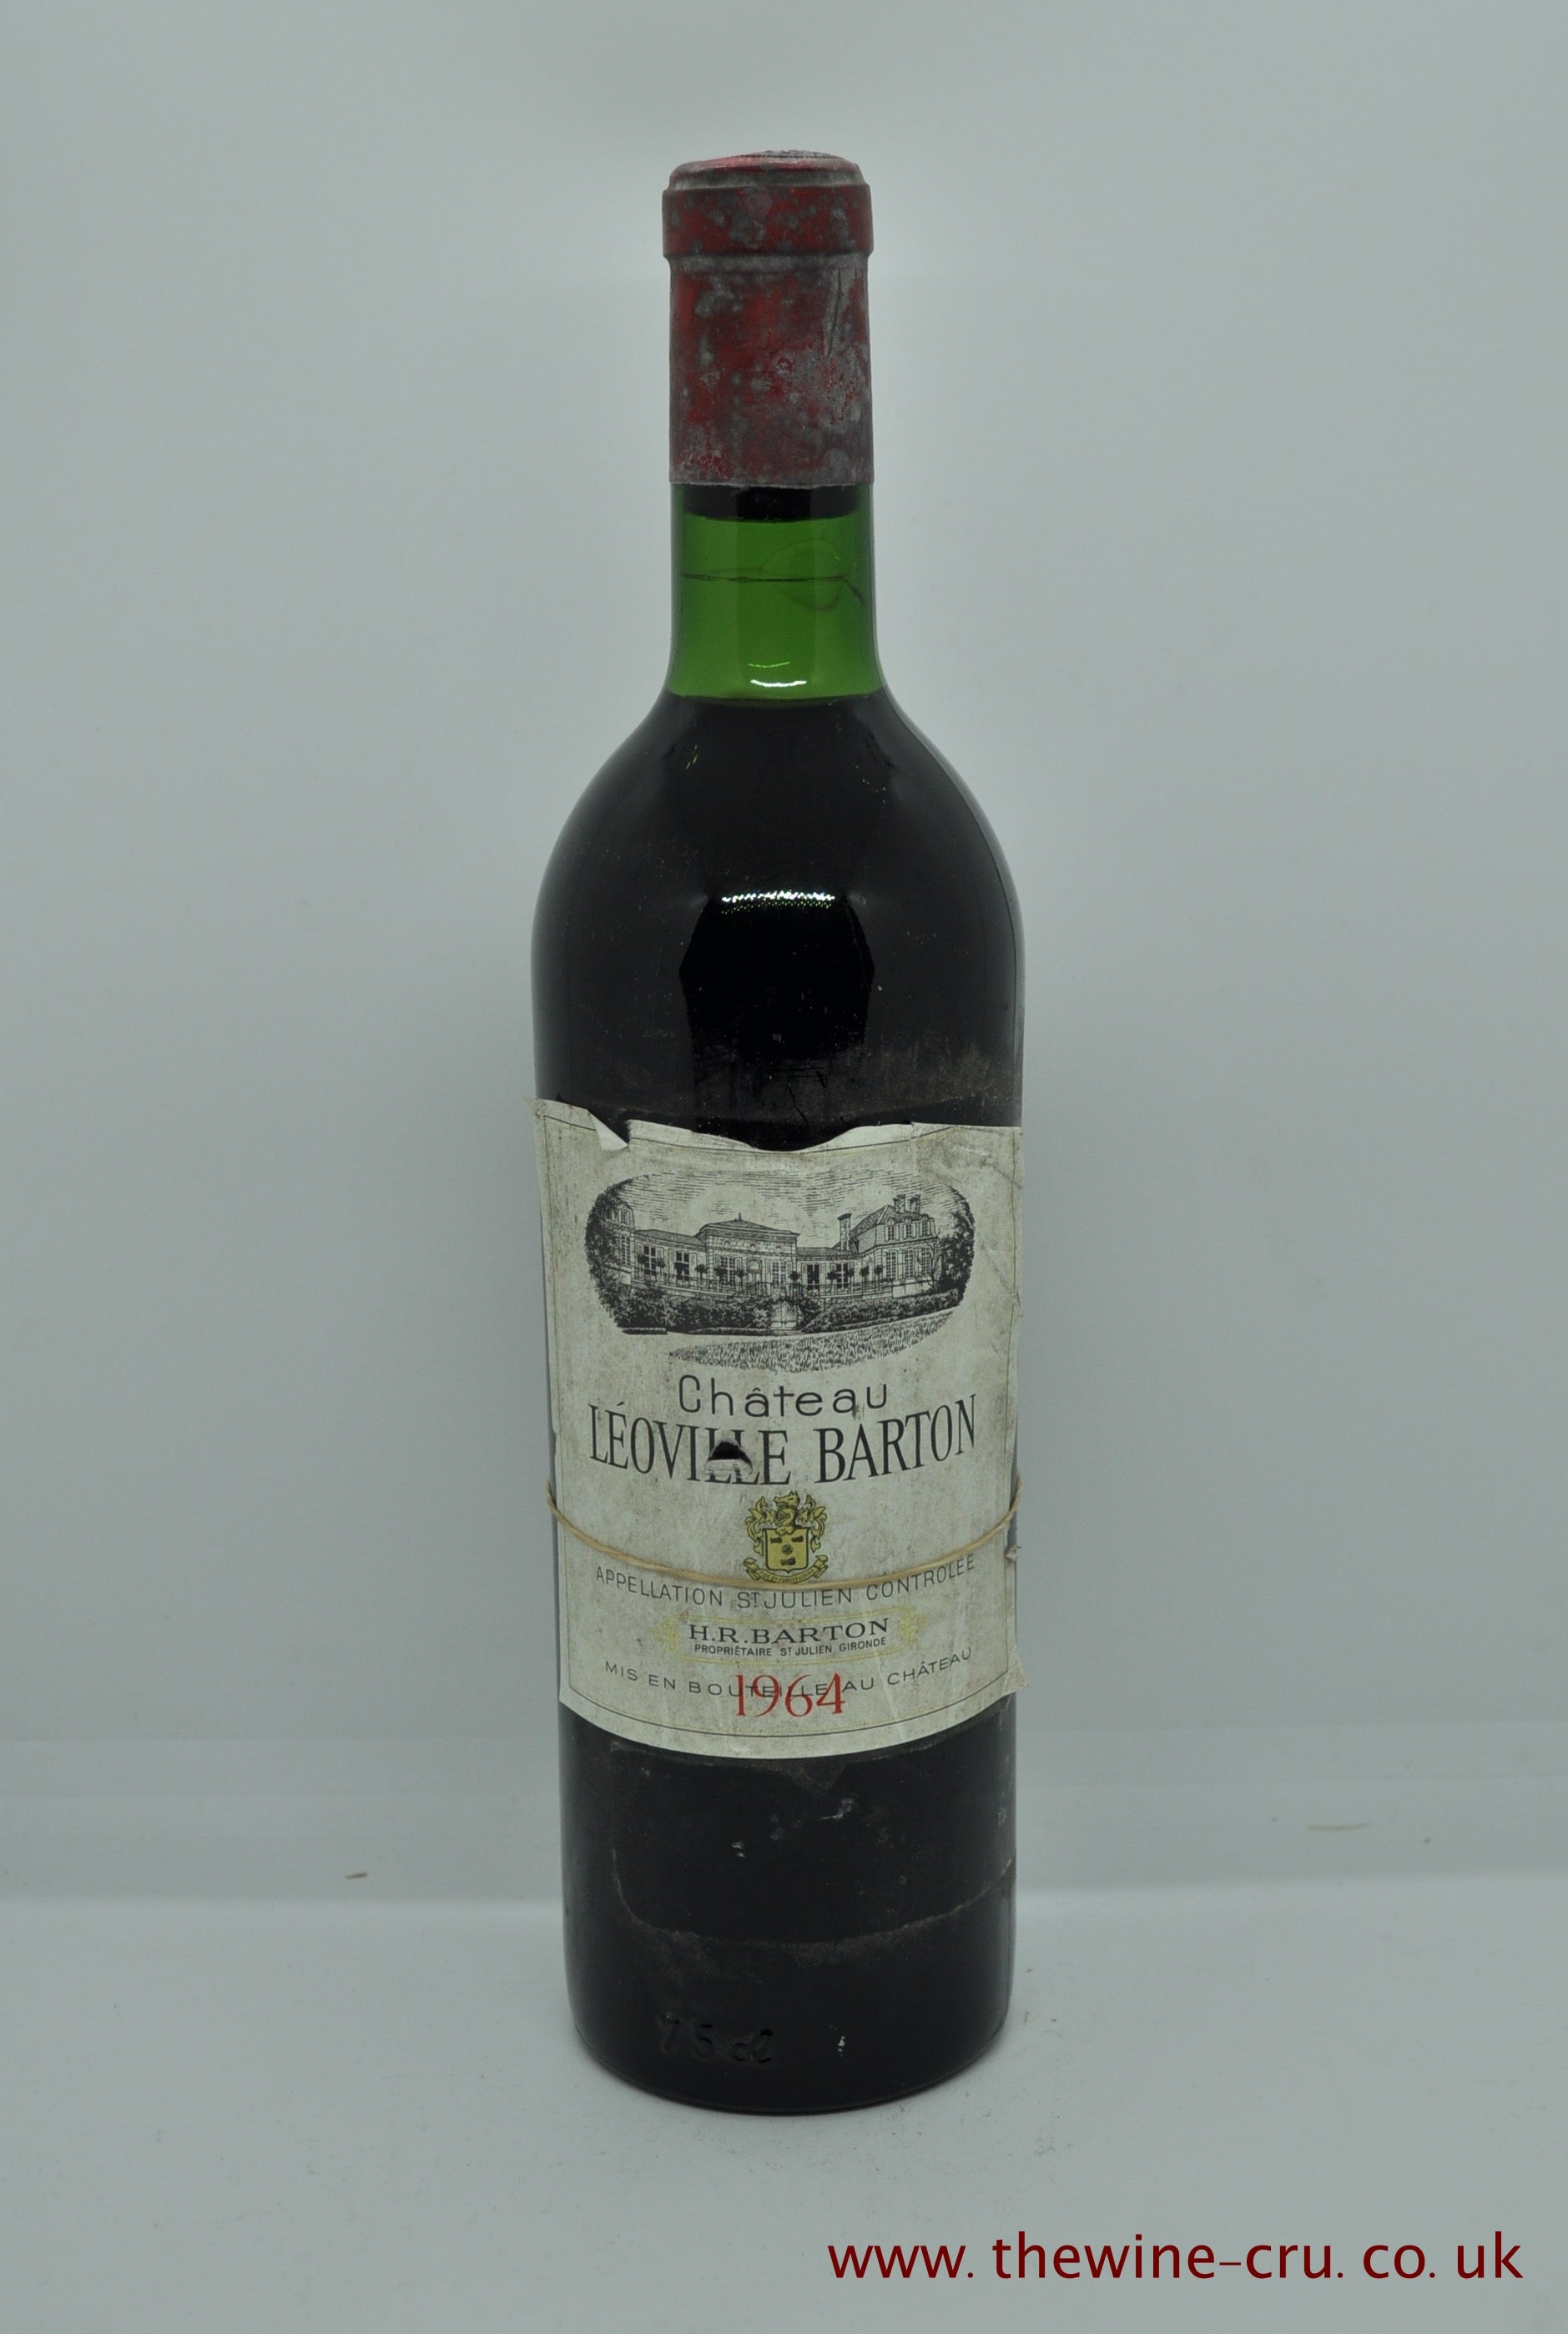 A bottle of 1964 vintage red wine. Chateau Leoville Barton 1964 Bordeaux France. The bottle is in good condition, the label is complete but loose. The wine level is very top shoulder. immediate delivery. Free local delivery. Gift wrapping available.